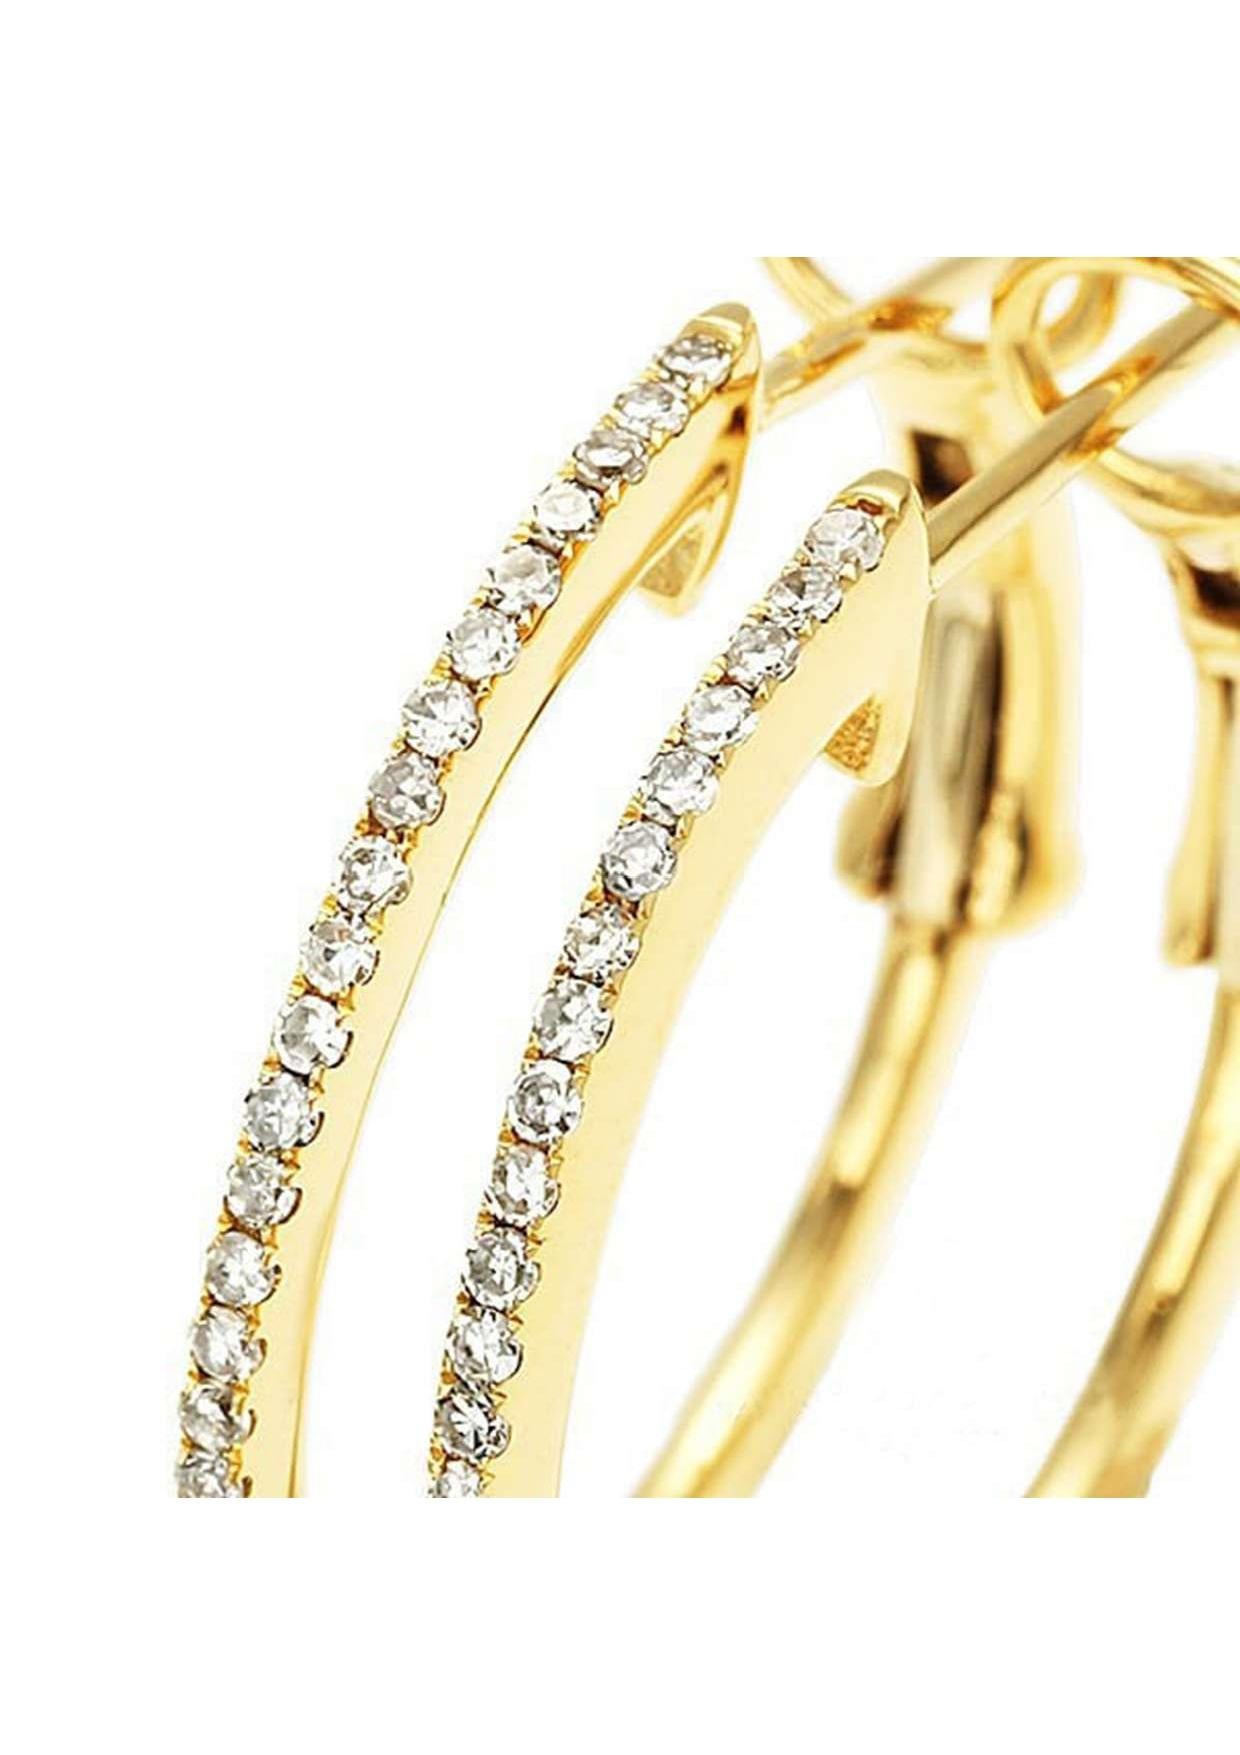 Adorn your ears with these stunning 18K Yellow Gold Diamond Hoop Earrings, featuring sparkling diamonds totaling 0.19ct.

Details:
* SKU: cin415
* Material: 18K Yellow Gold
* Jewelry Type: Earrings
* Size: Approximately 20.5mm x 1.1mm
* Diamond